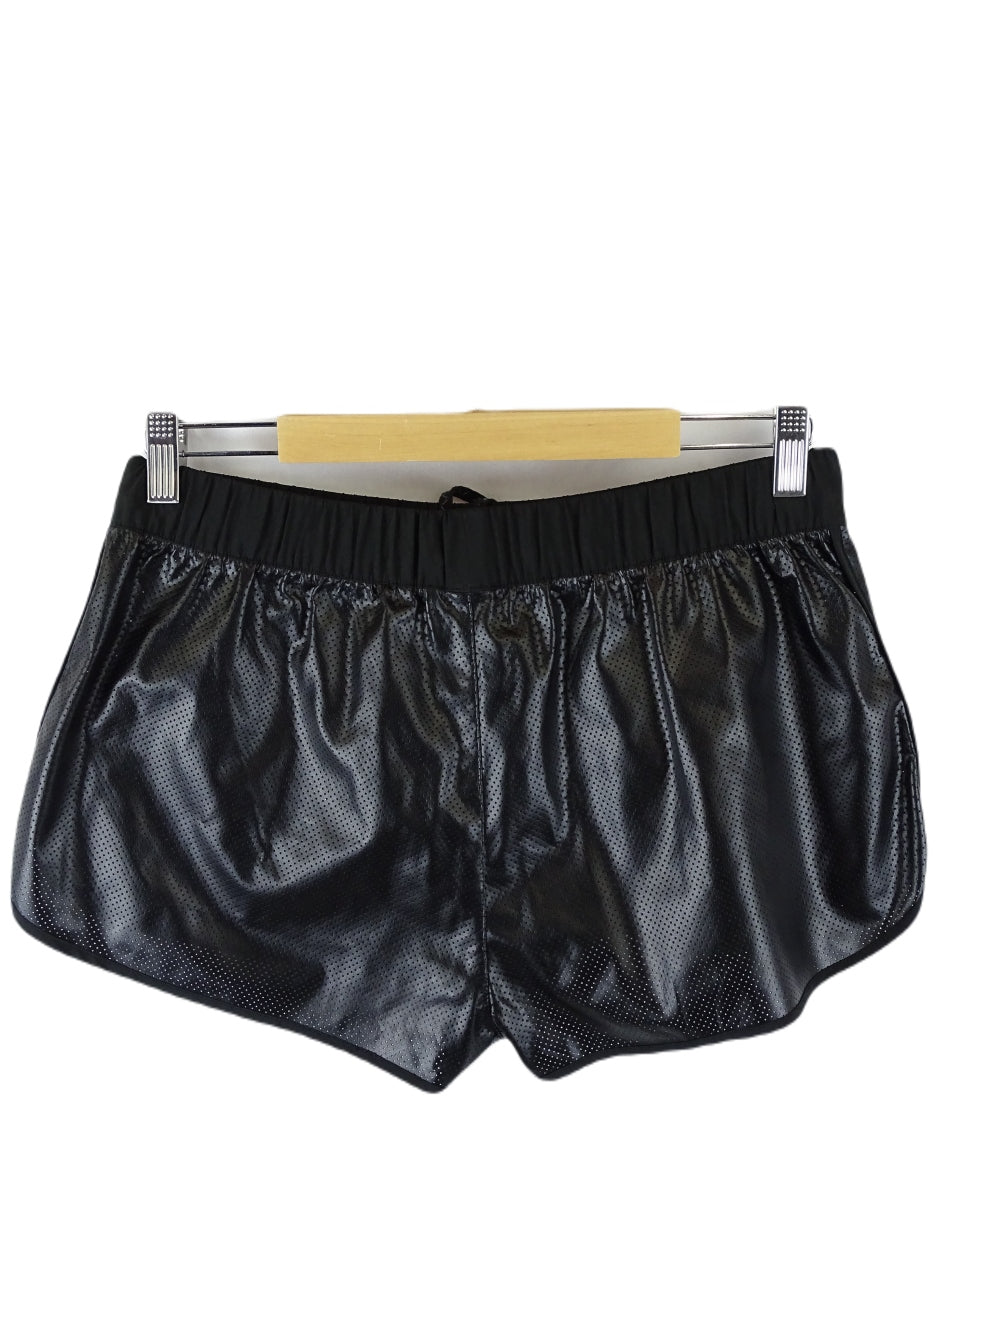 Seafolly Black Faux Leather Shorts S